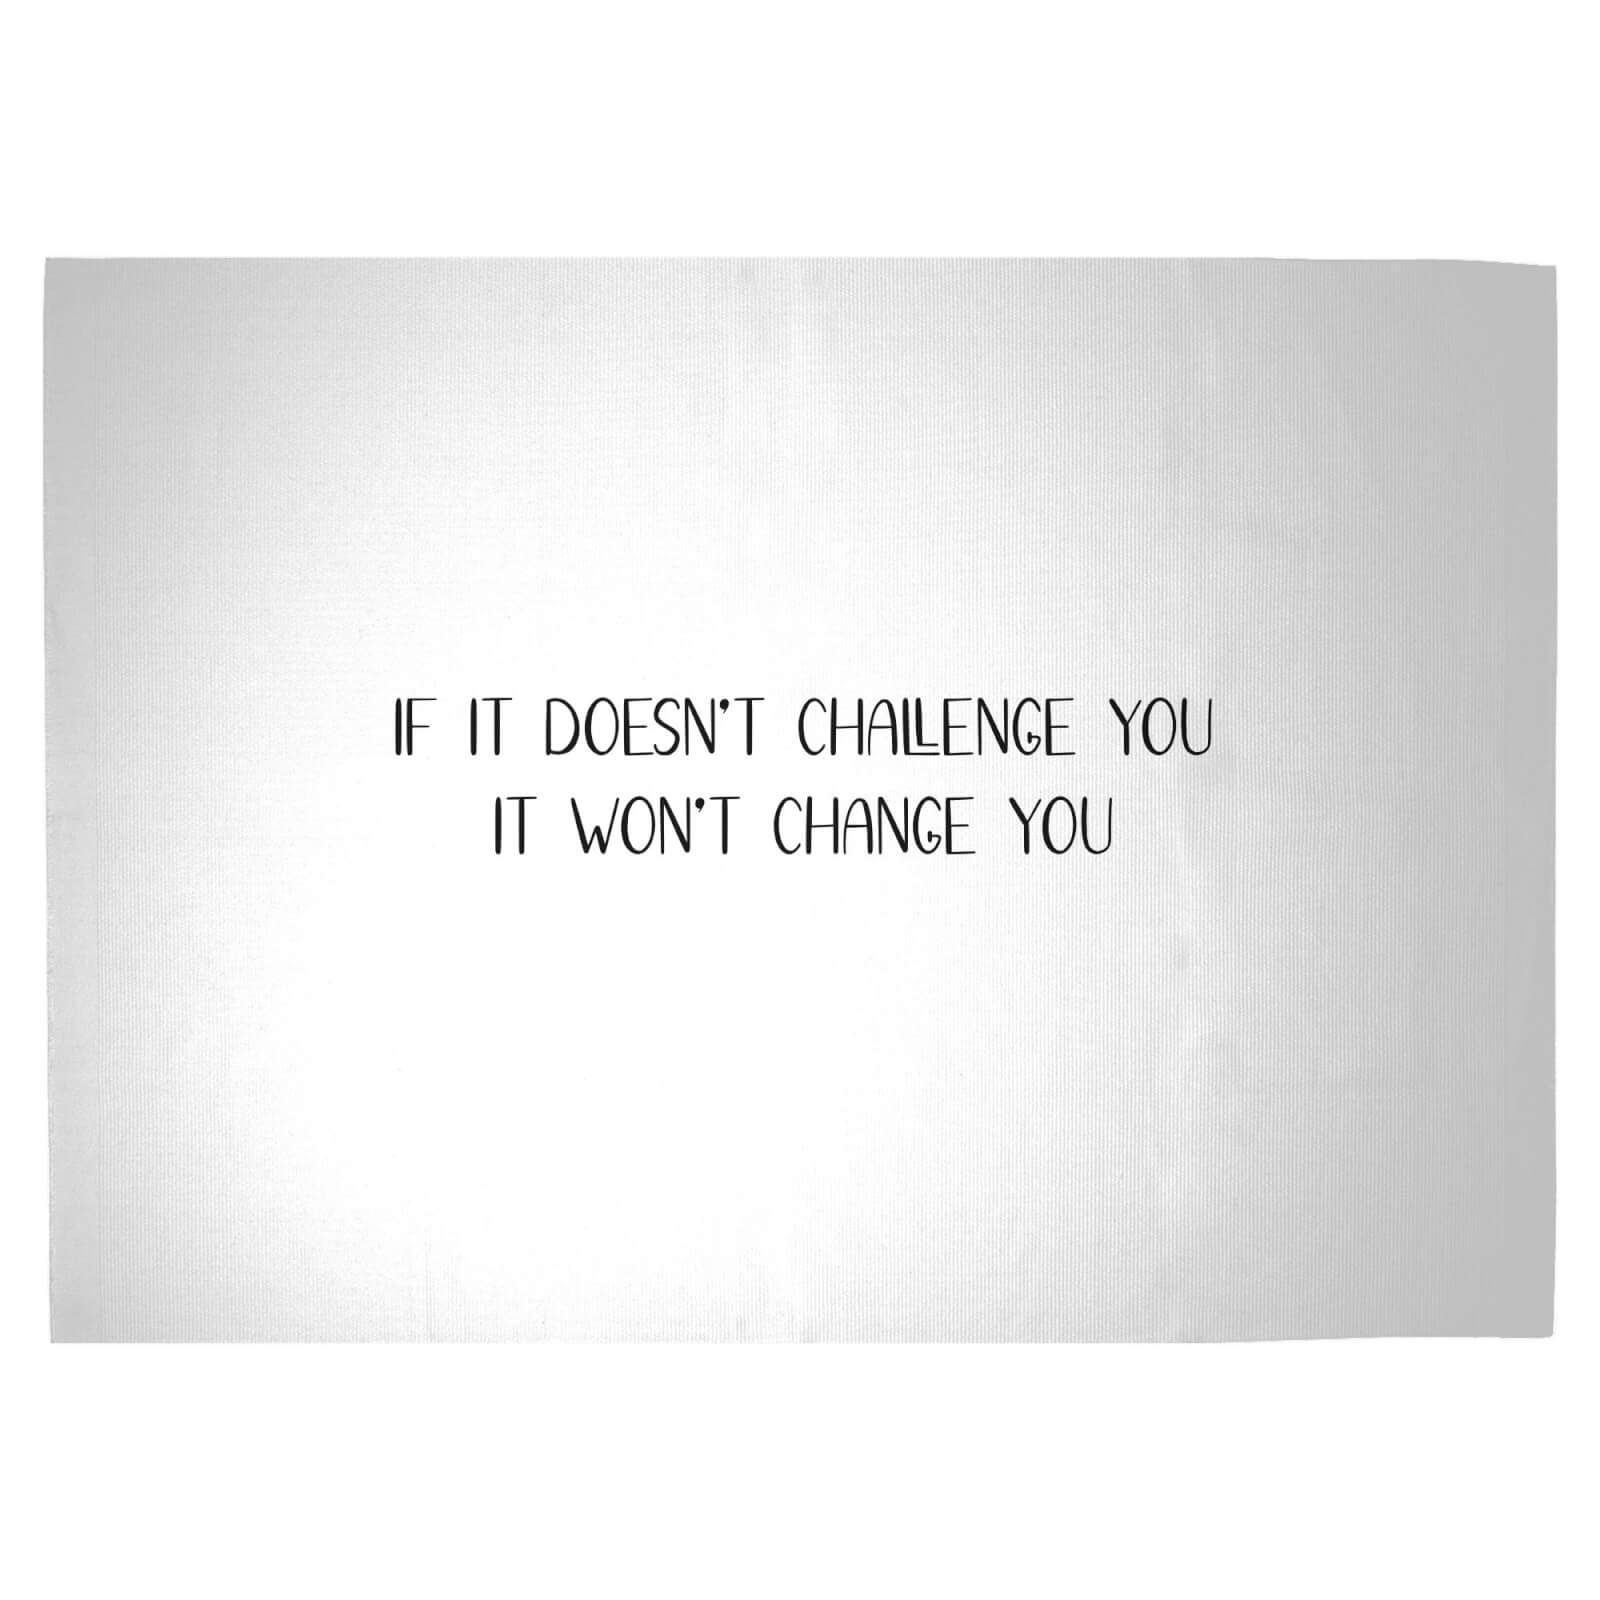 If It Doesn't Challenge You, It Won't Change You Woven Rug - Large